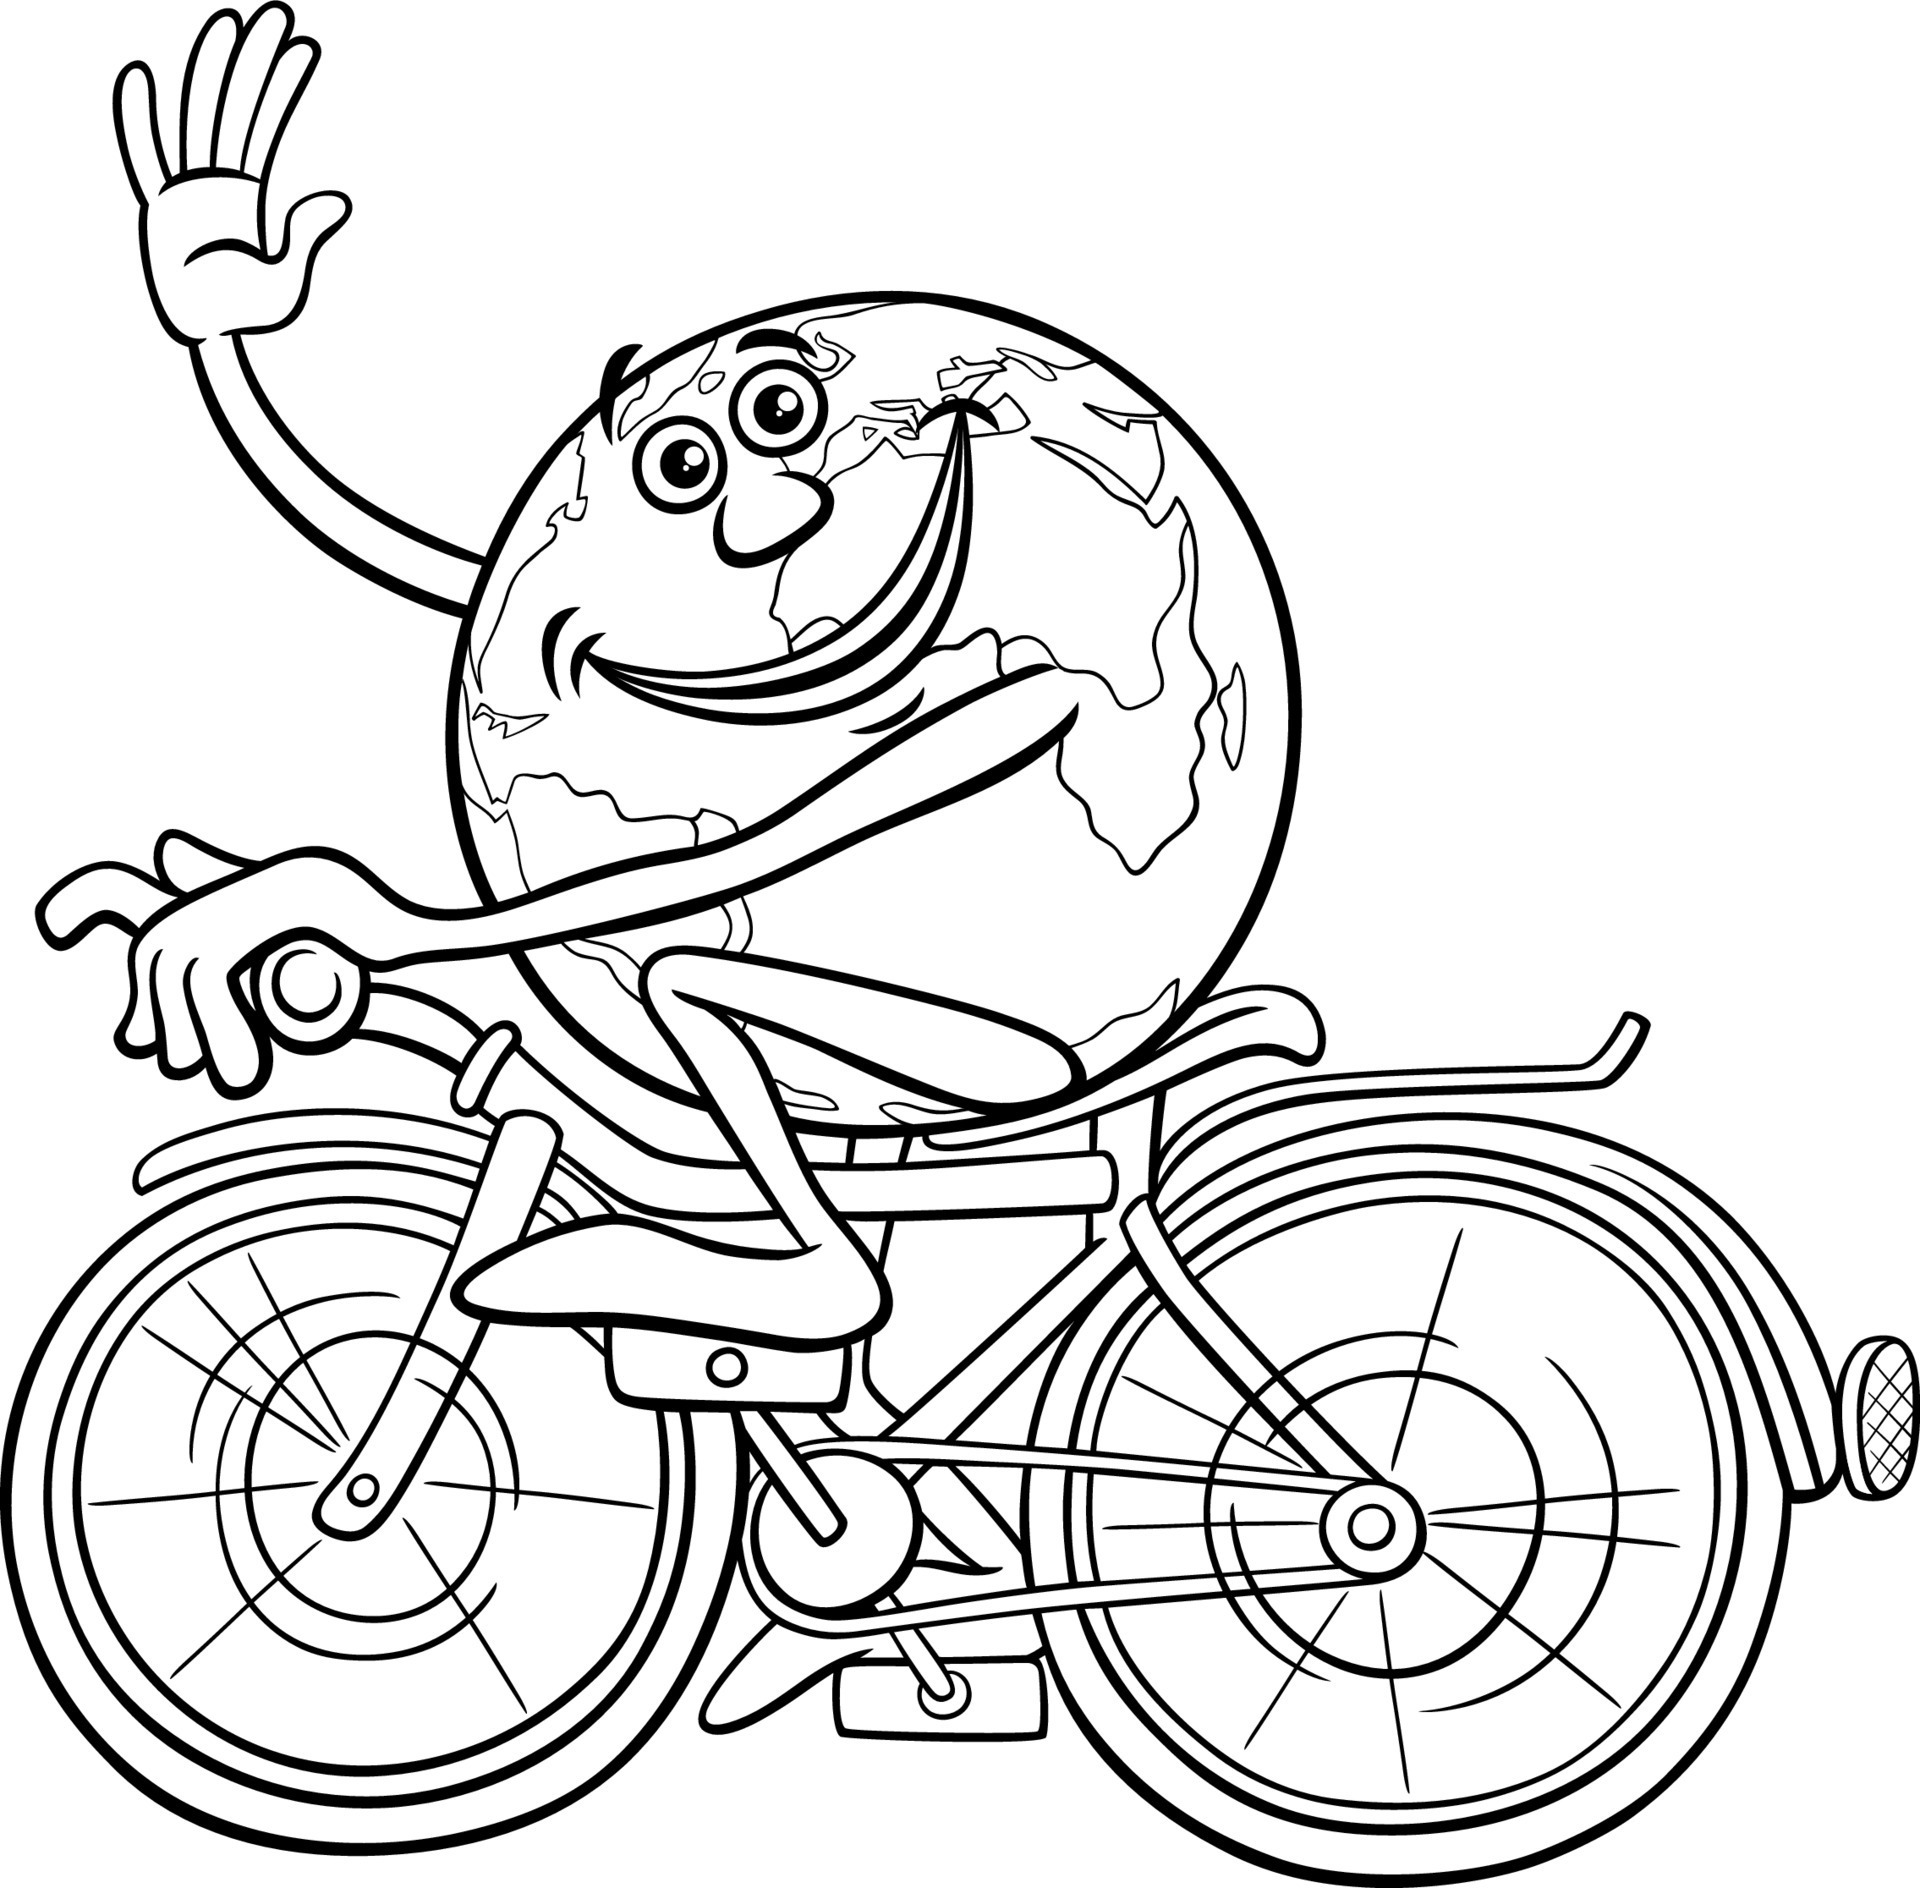 cartoon Earth riding a bicycle coloring page 16146456 Vector Art at Vecteezy